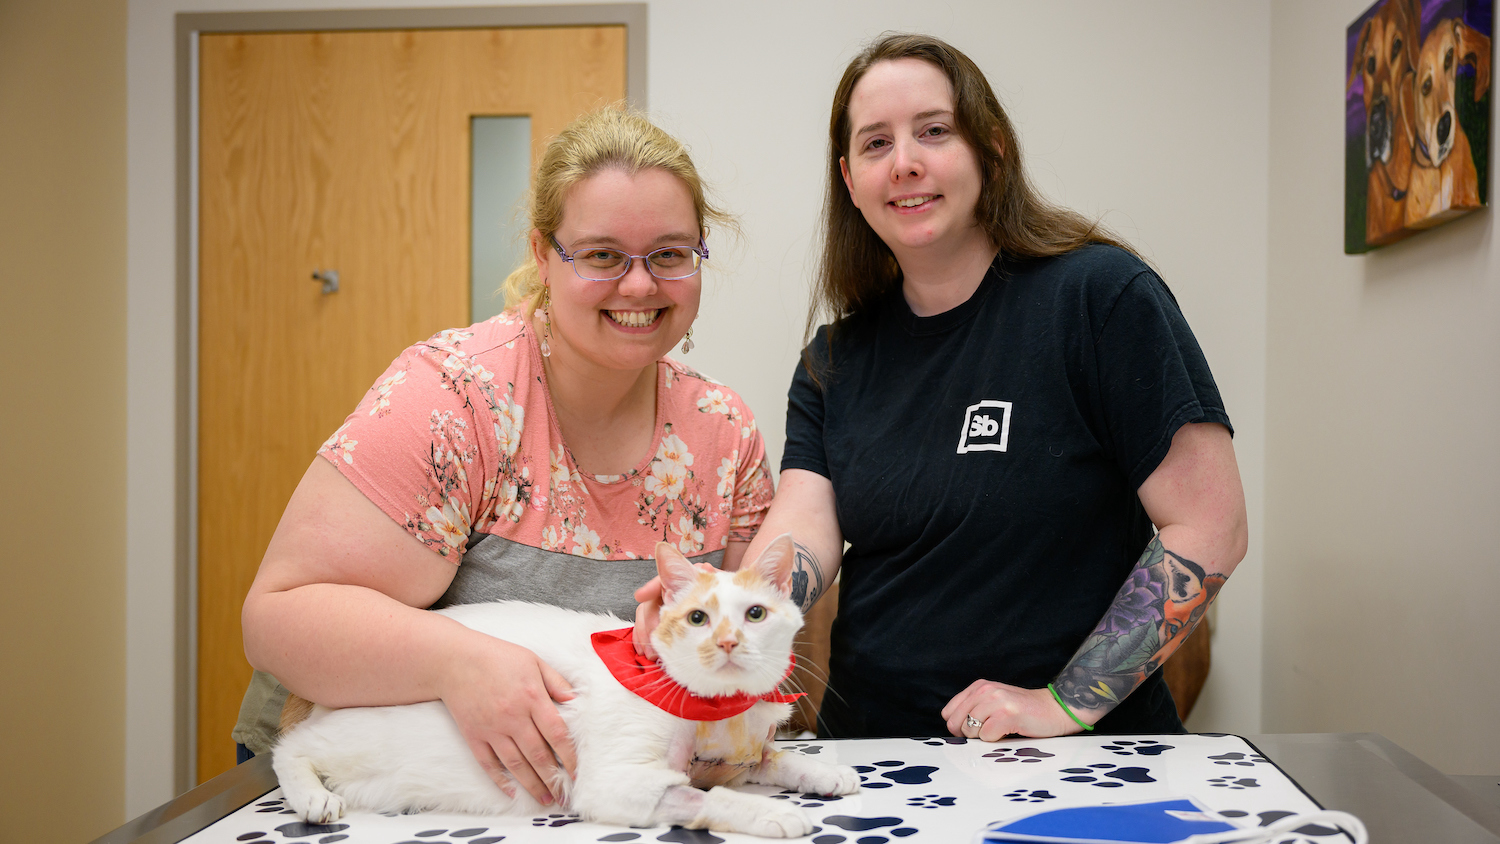 Bento poses with his owners, Jamie Caknipe and Kelly Gordon, during a visit to the NC State Veterinary Hospital.